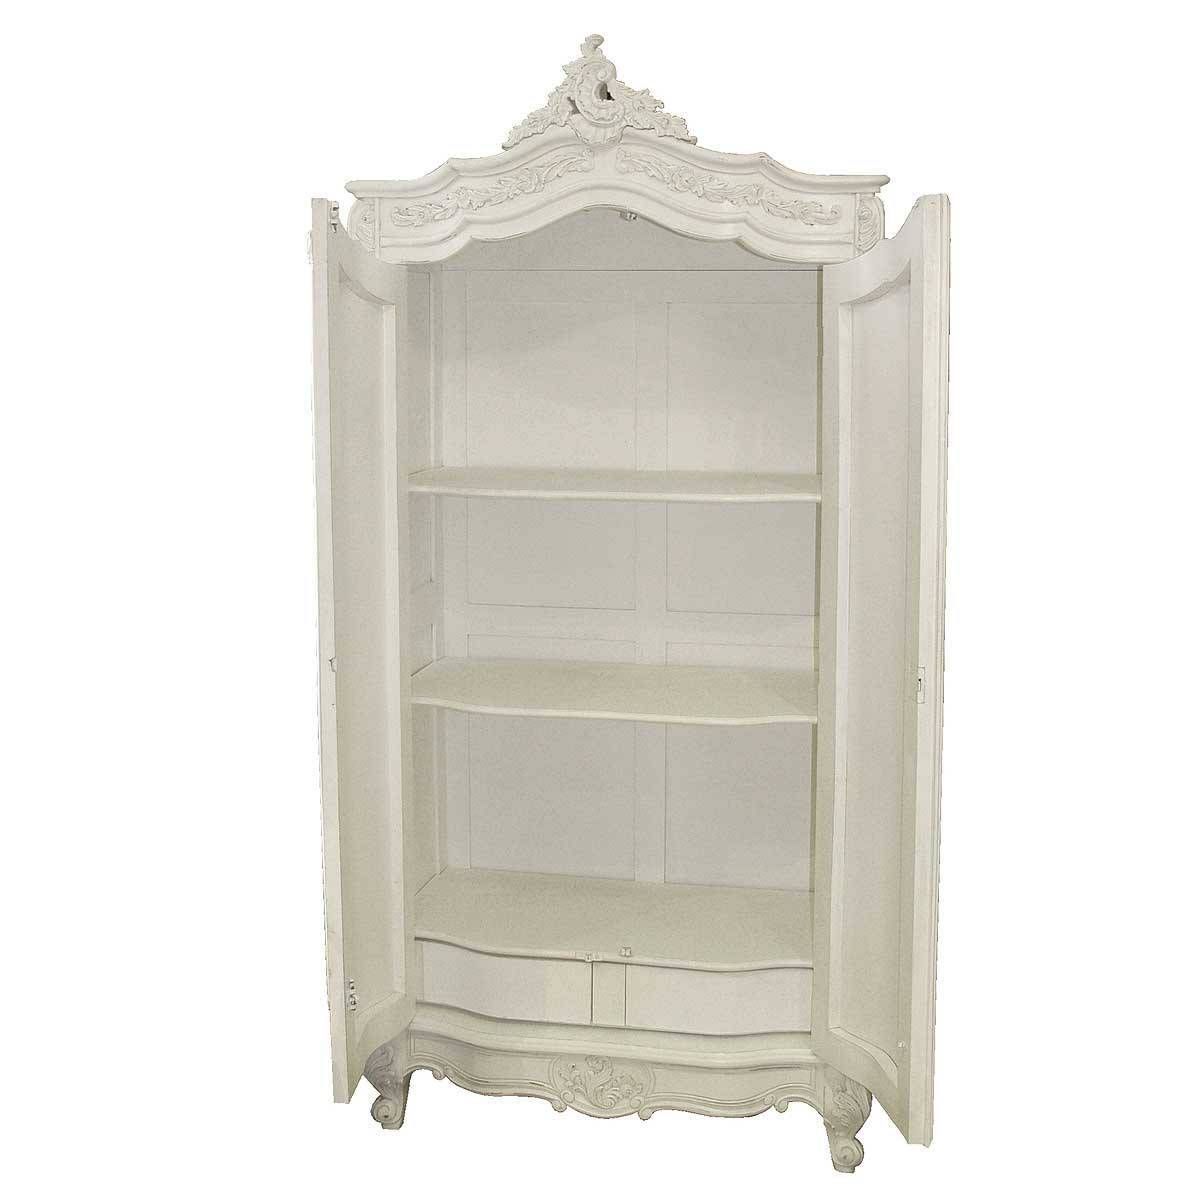 Provencal Classic White Armoire | Luxury Armoire With Regard To French Wardrobes (View 14 of 15)